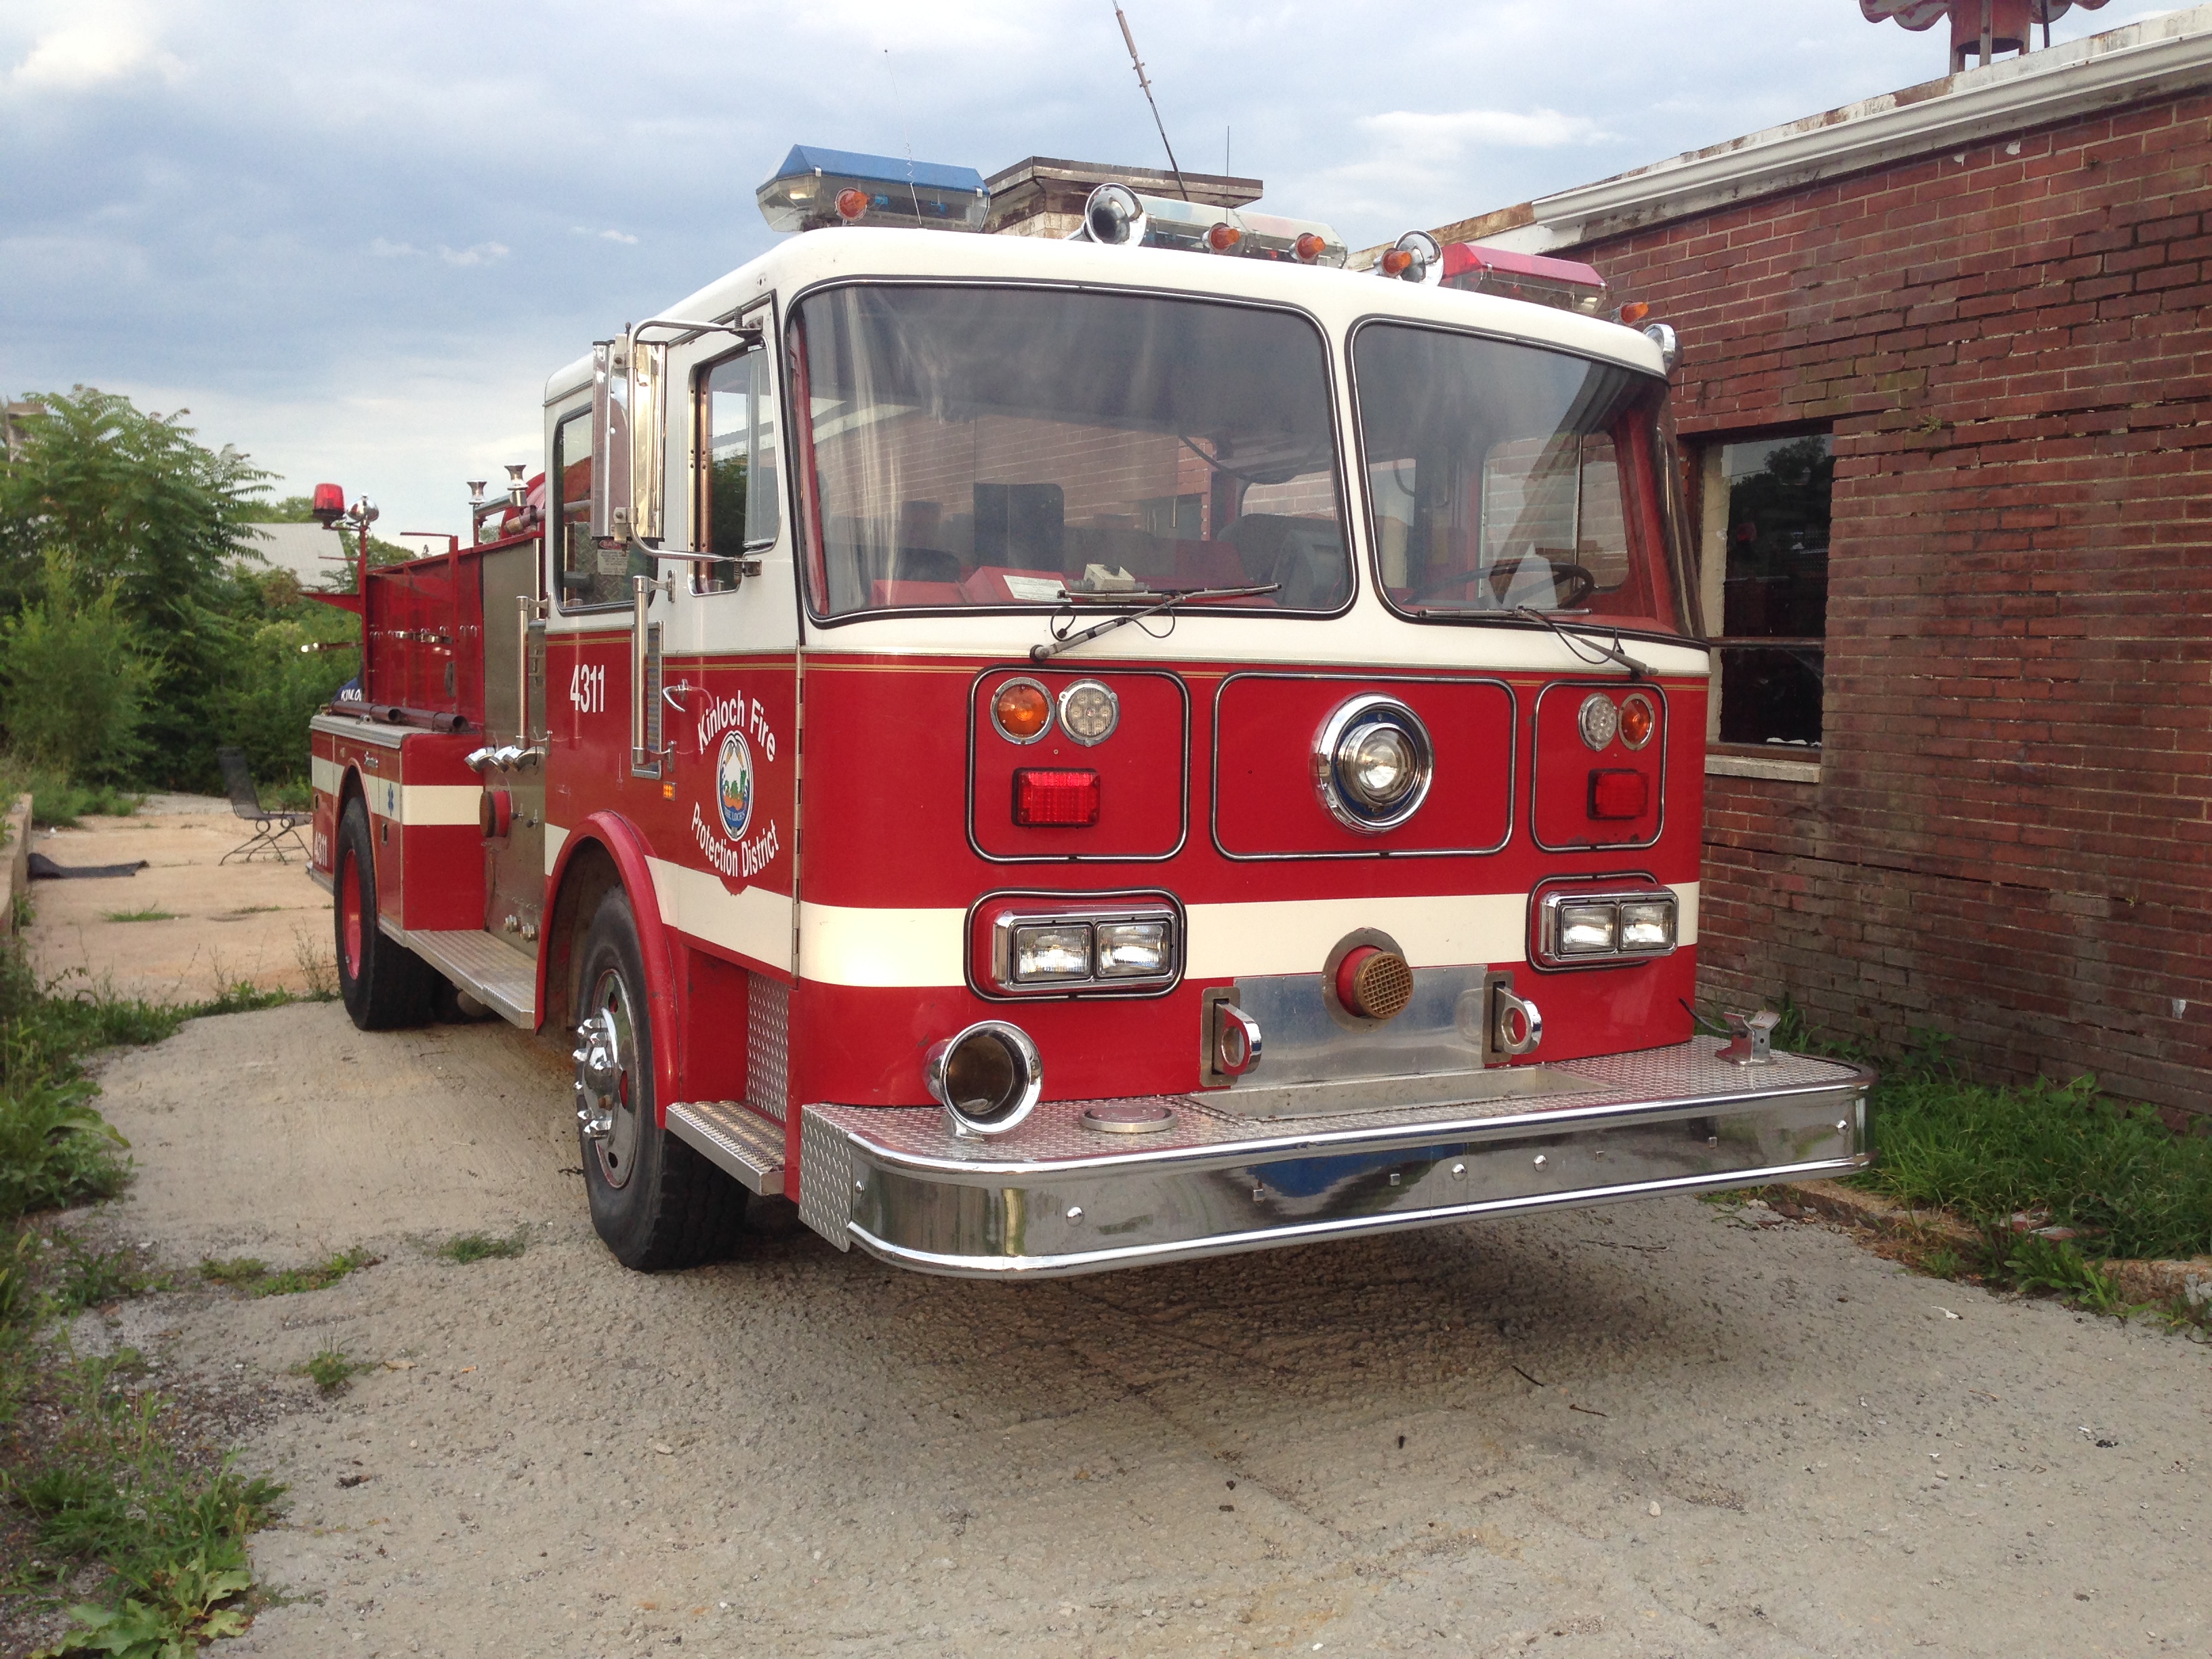 Wait, you can buy a fire truck on Craigslist? GTFO!